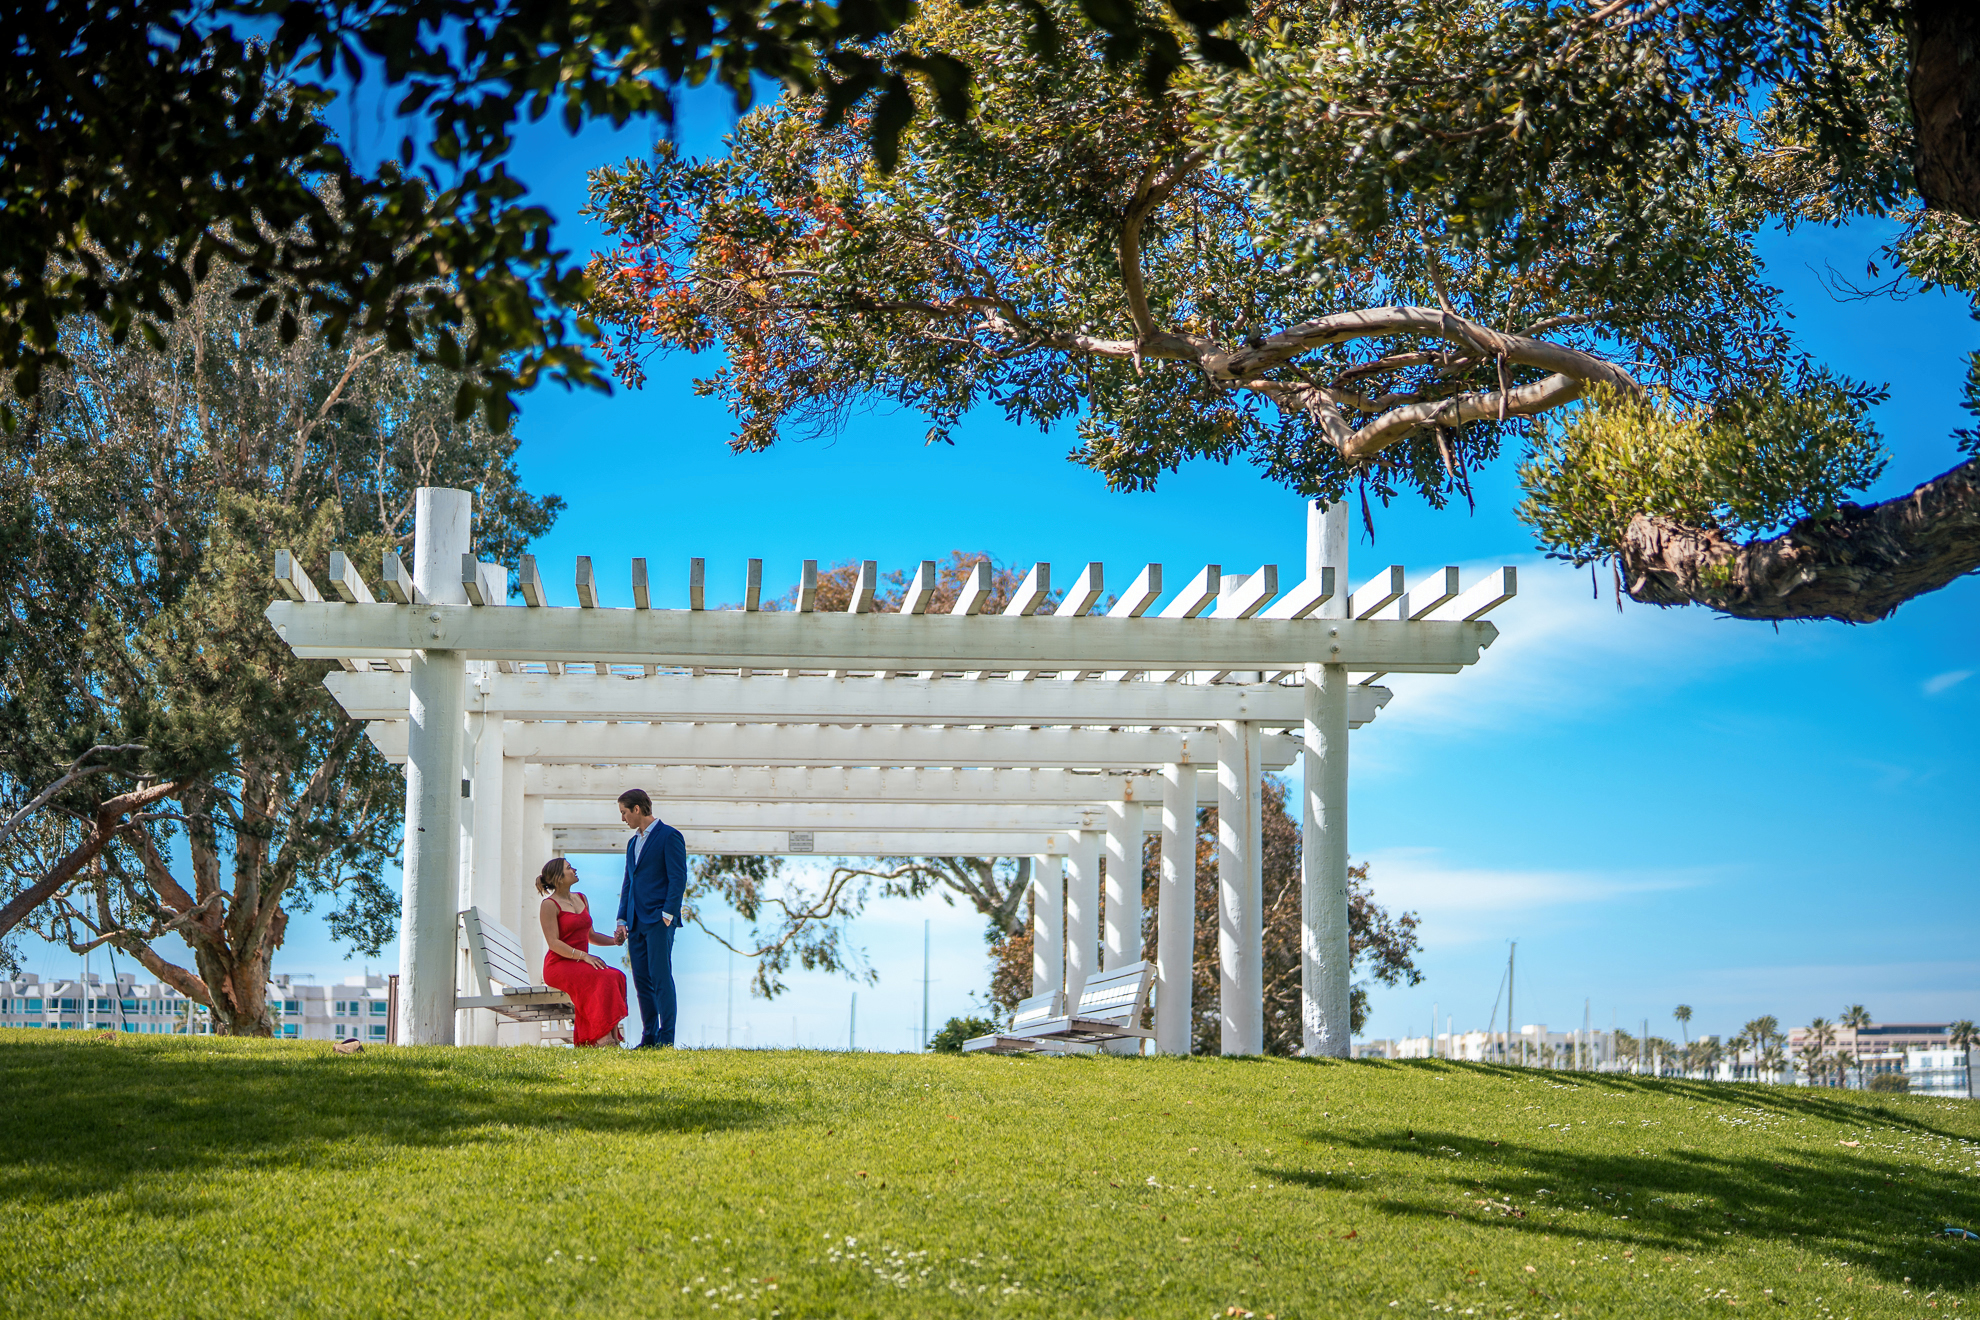 ThomasKim Photography Los Angeles Wedding Photographer A couple standing under a pergola on a grassy area, facing each other.